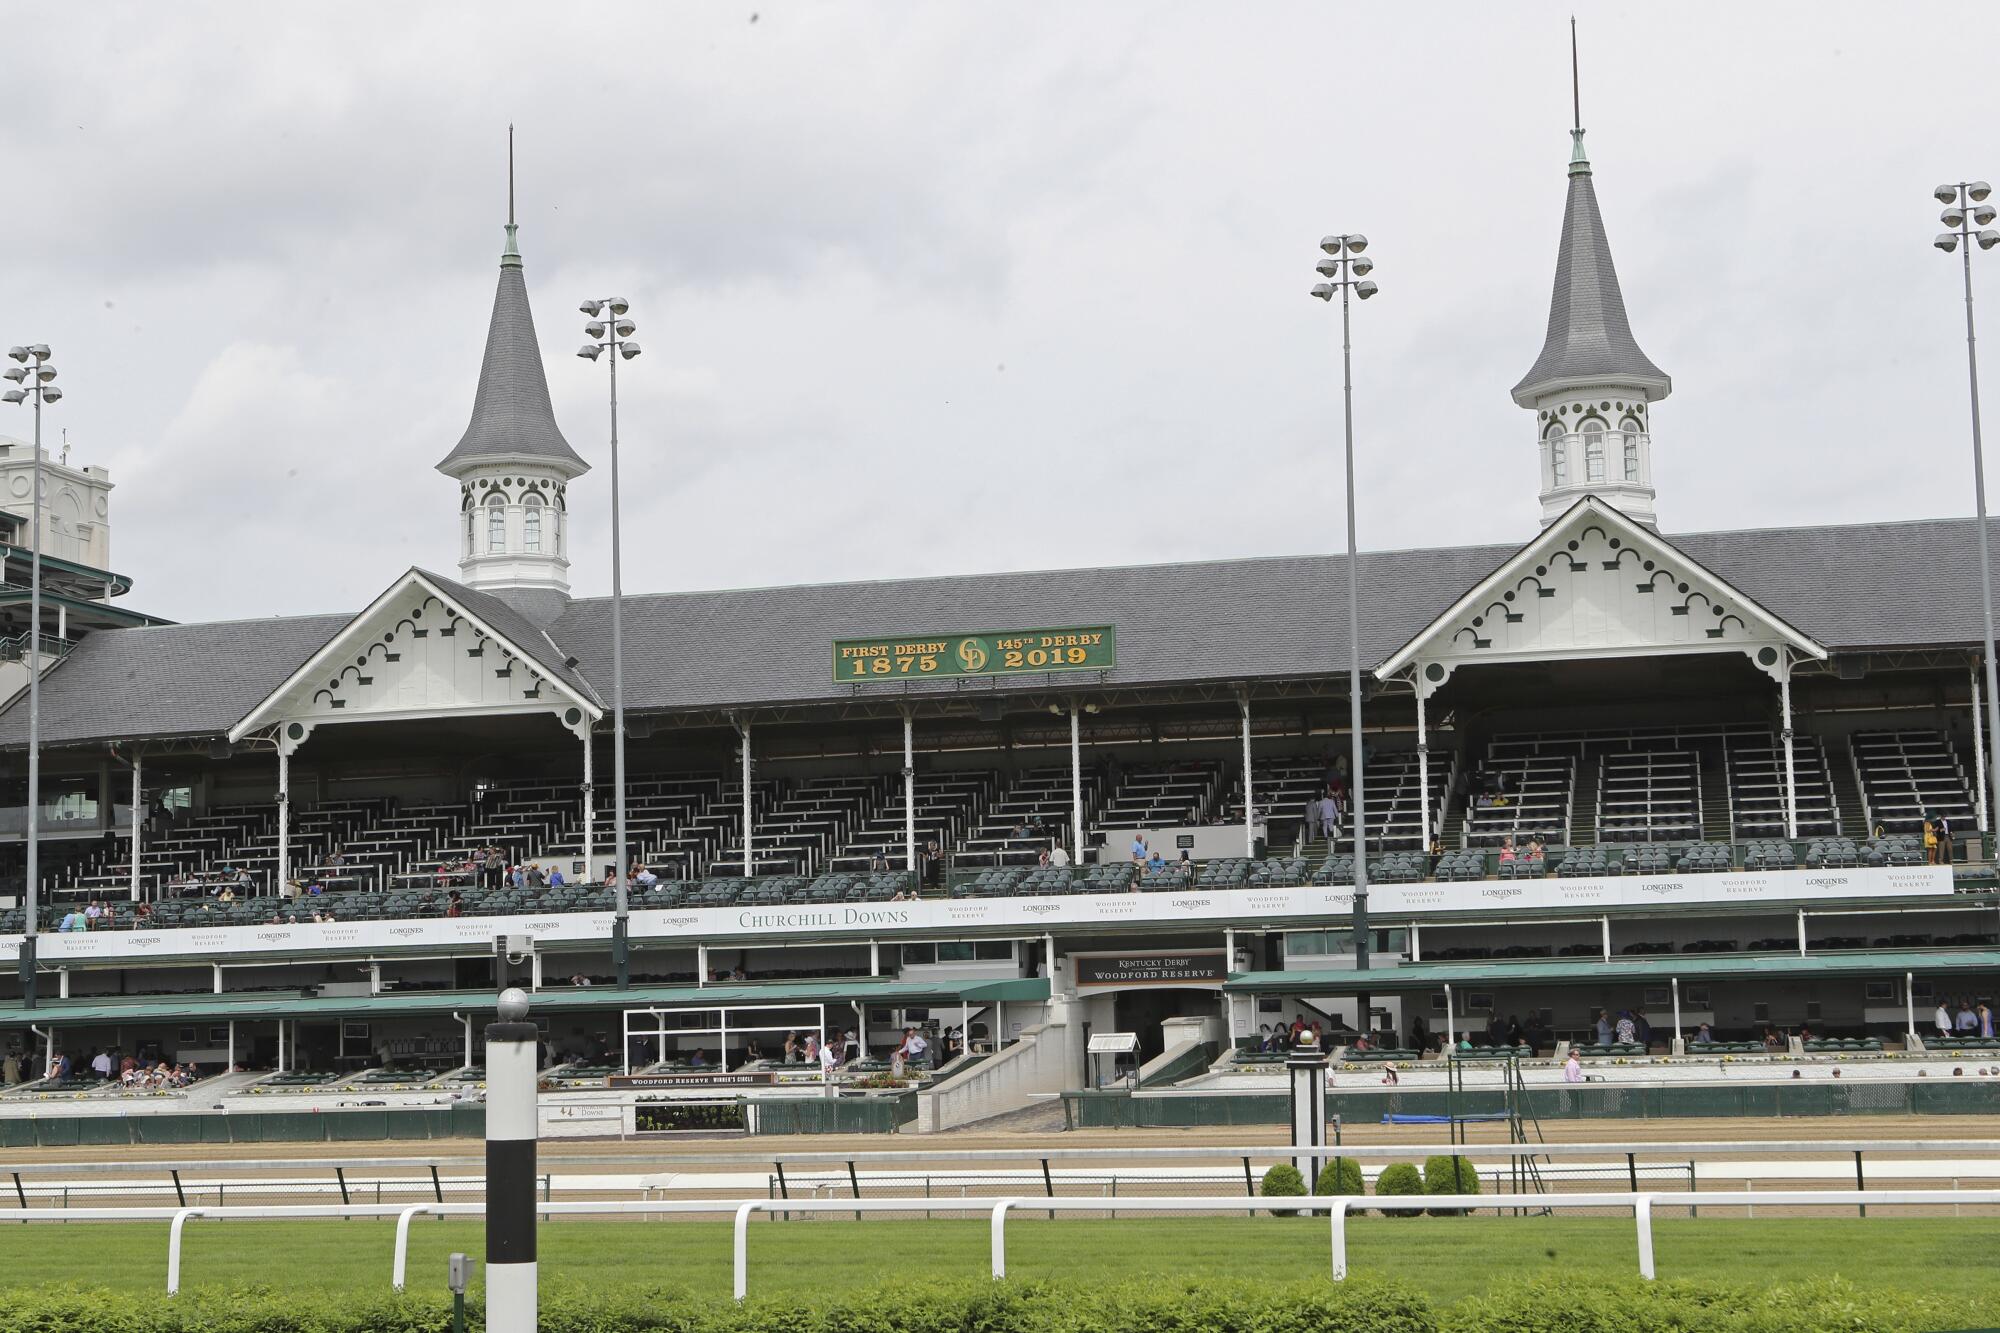 The twin spires are considered the signature view at Churchill Downs. 